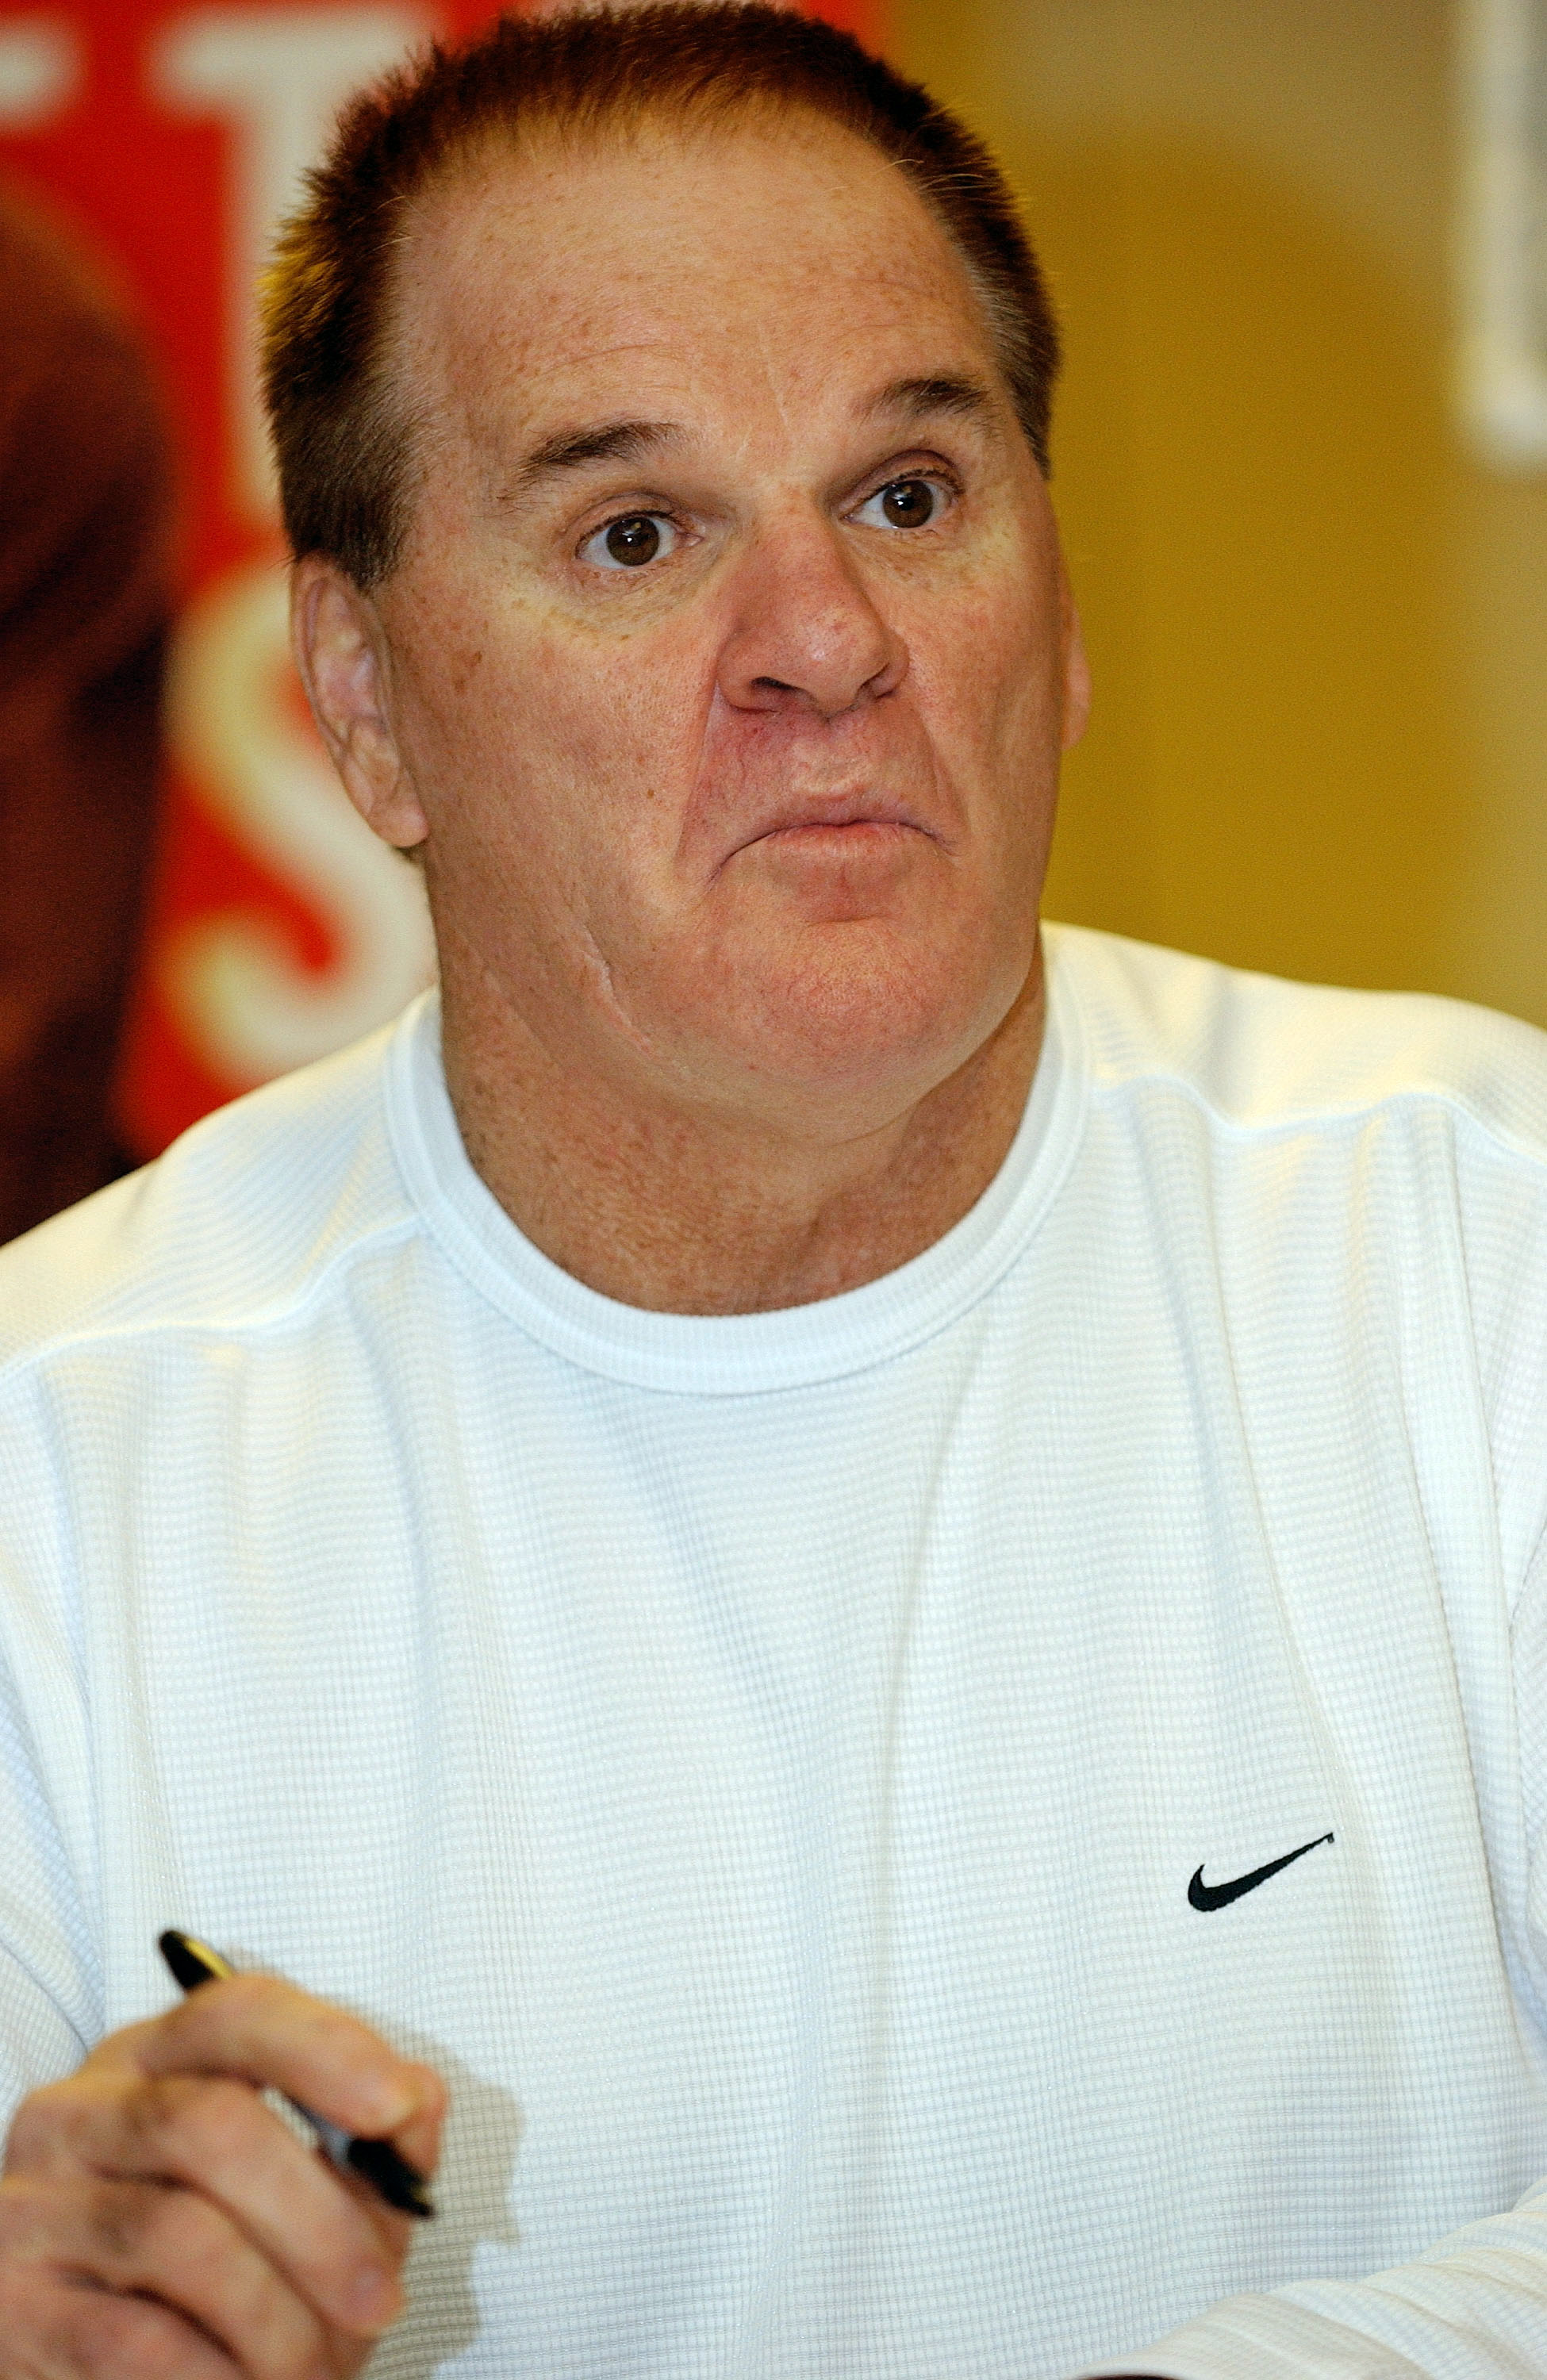 RIDGEWOOD, NJ - JANUARY 8:  Baseball great Pete Rose looks up at a fan during his appearance at Bookends bookstore to autograph his new book 'Pete Rose  My Prison Without Bars' January 8, 2004 in Ridgewood, New Jersey.  (Photo by Stephen Chernin/Getty Ima